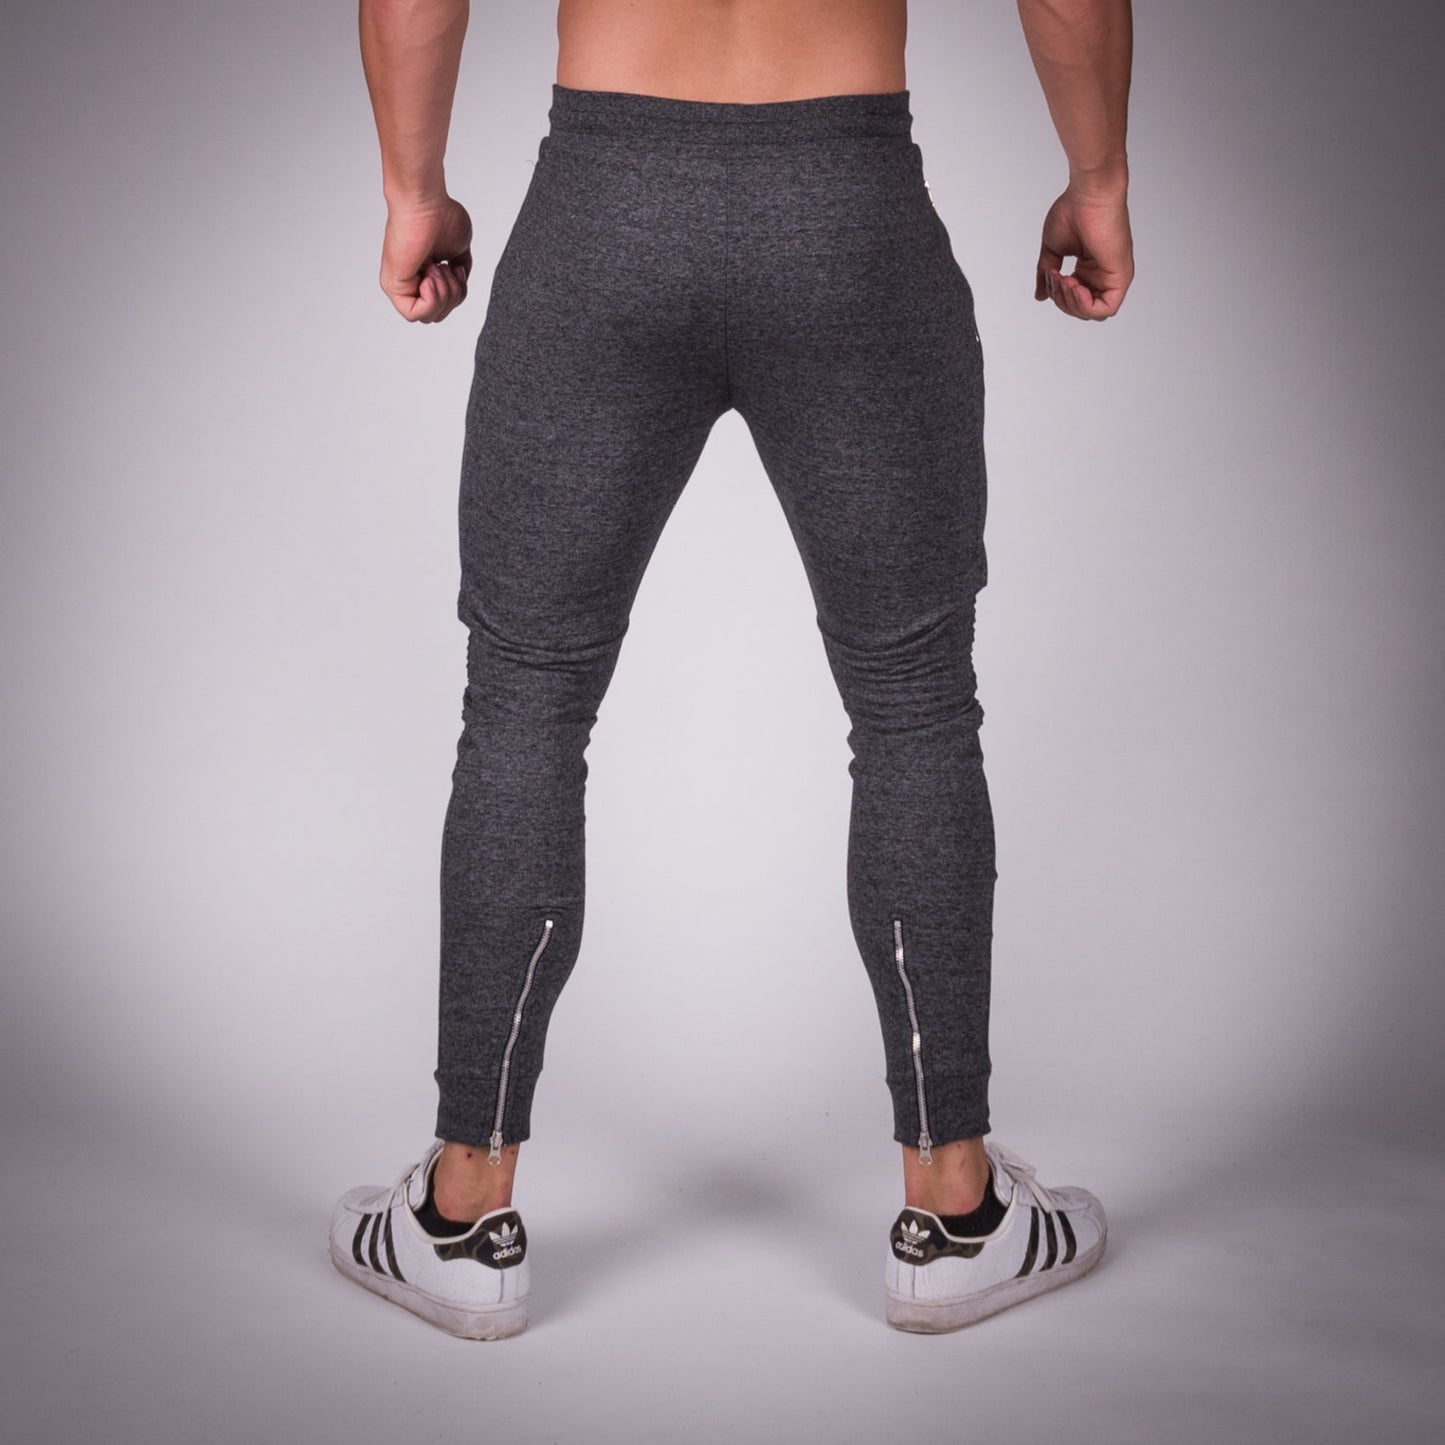 squatwolf-gym-wear-ripped-jogger-pants-grey-workout-pants-for-men